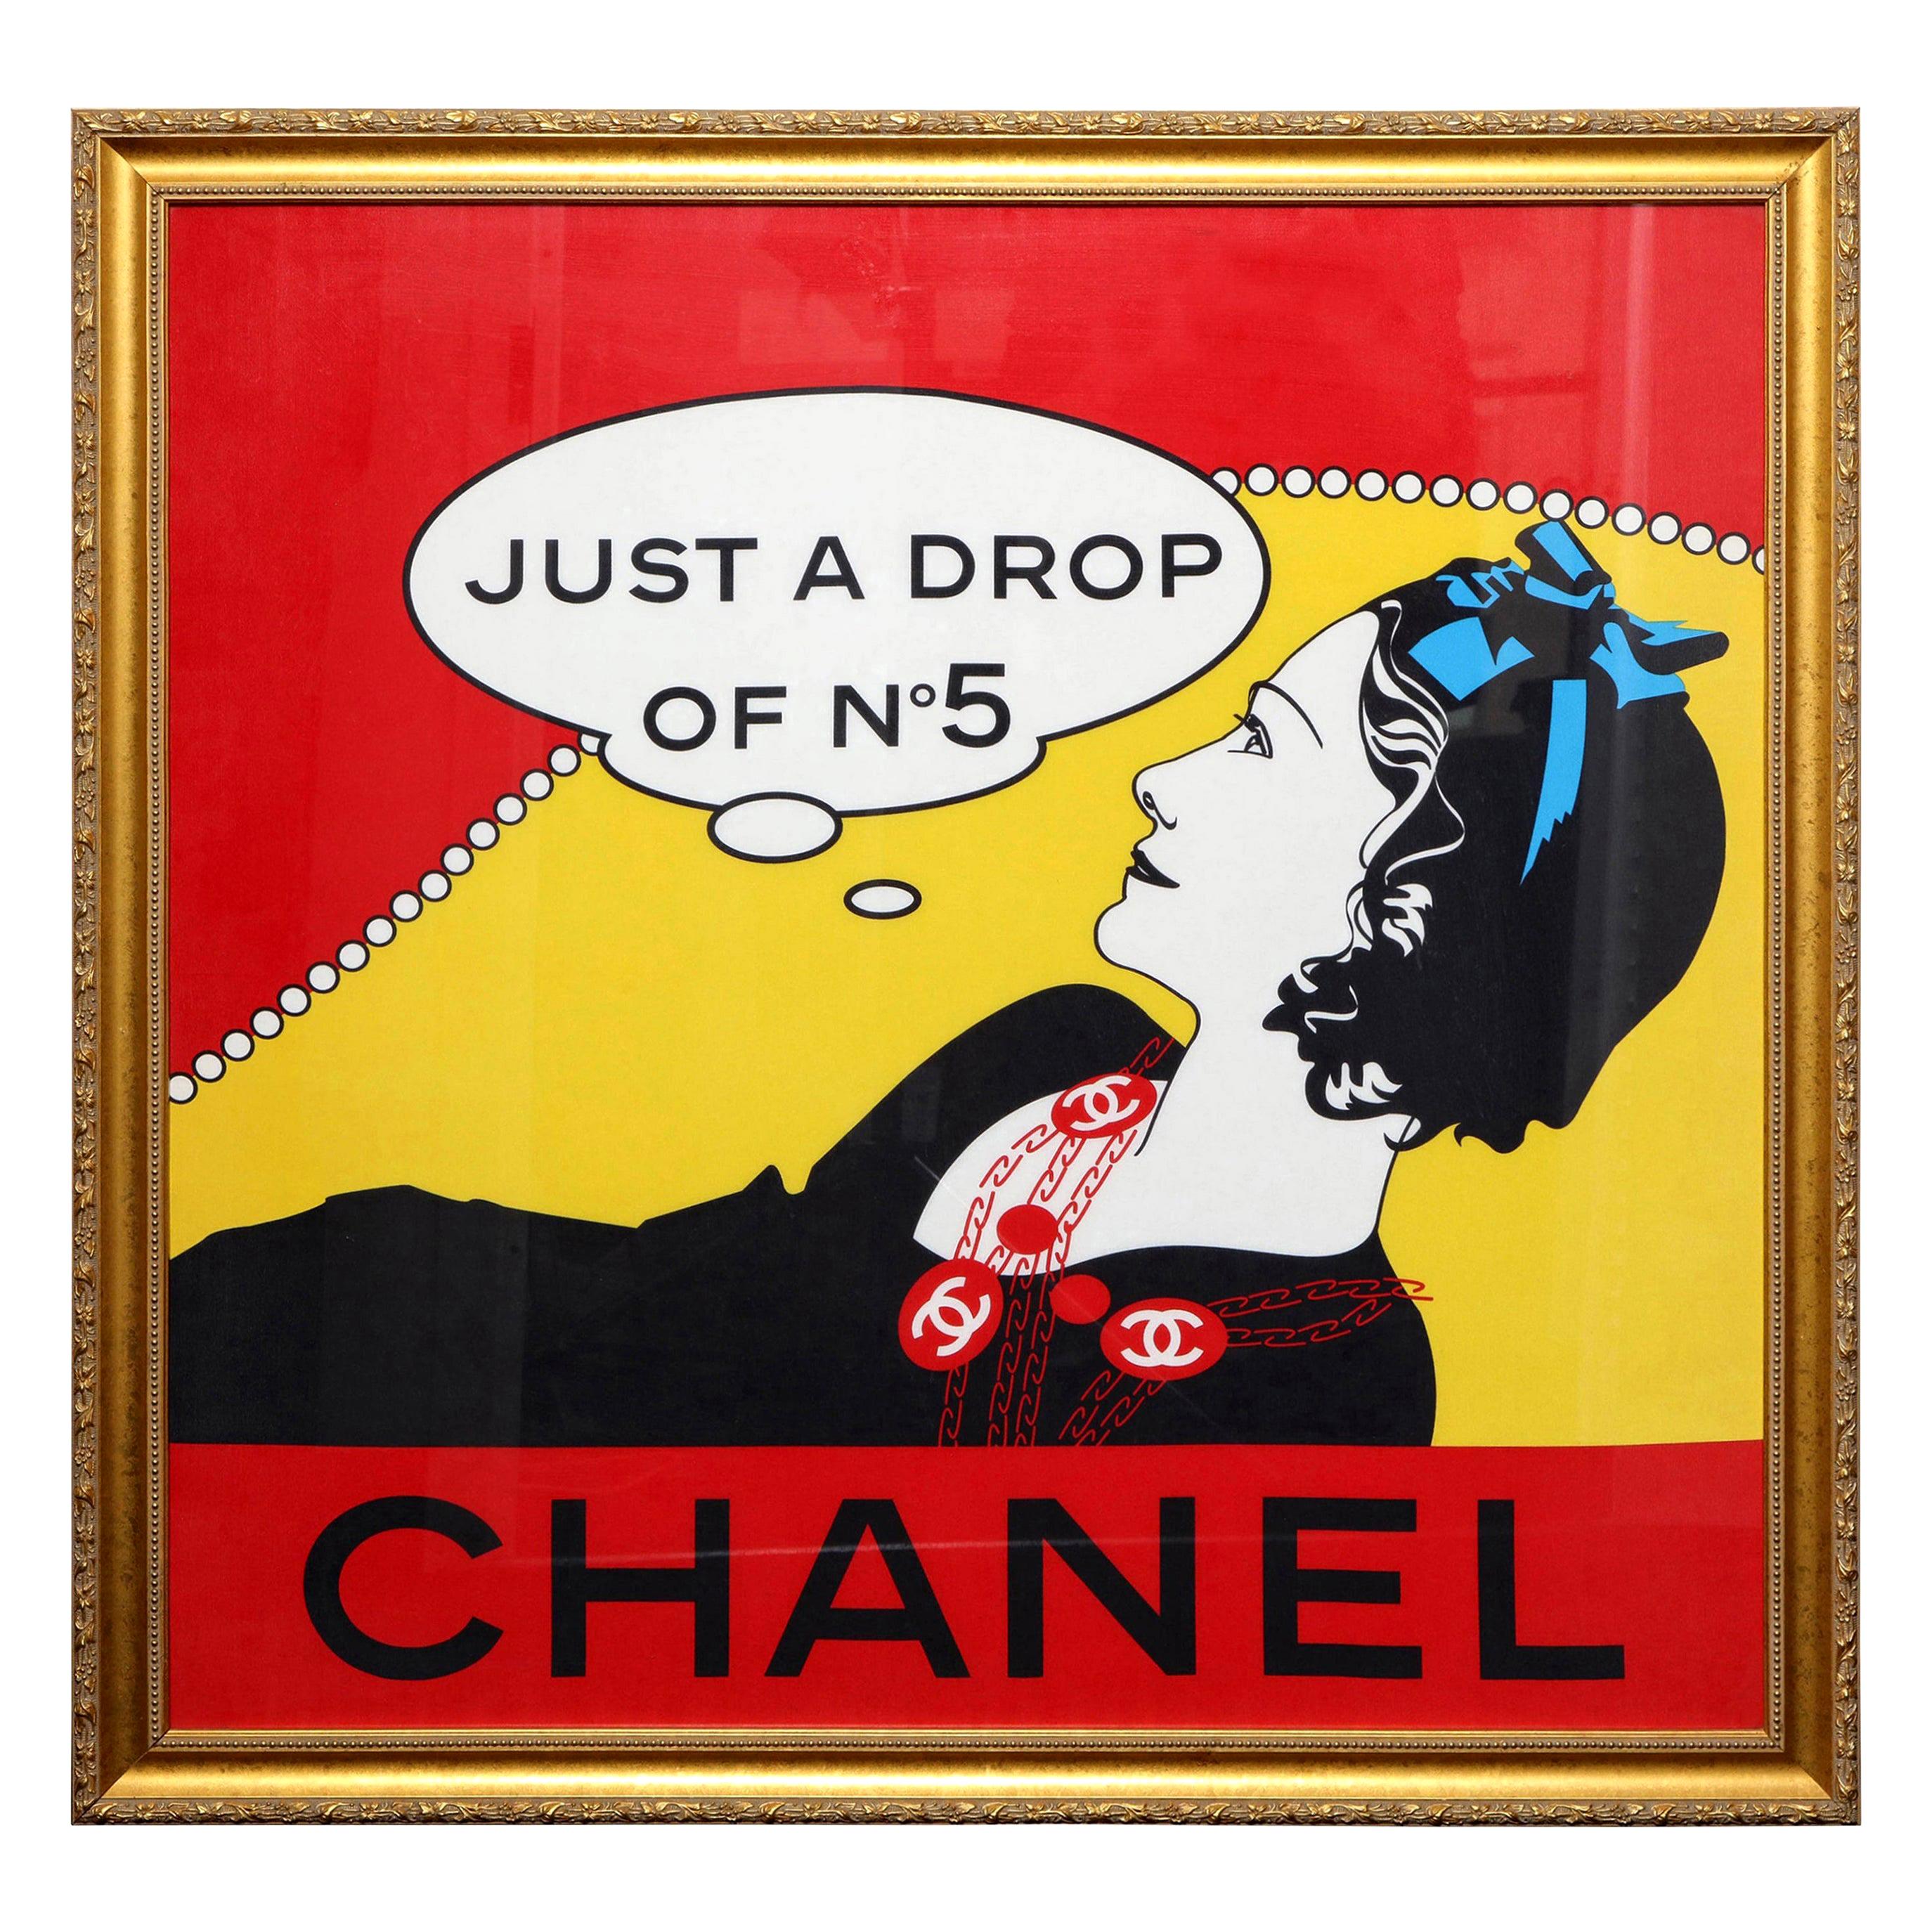 Extremely Rare Chanel "Drop of No.5" Scarf in Gold Frame For Sale